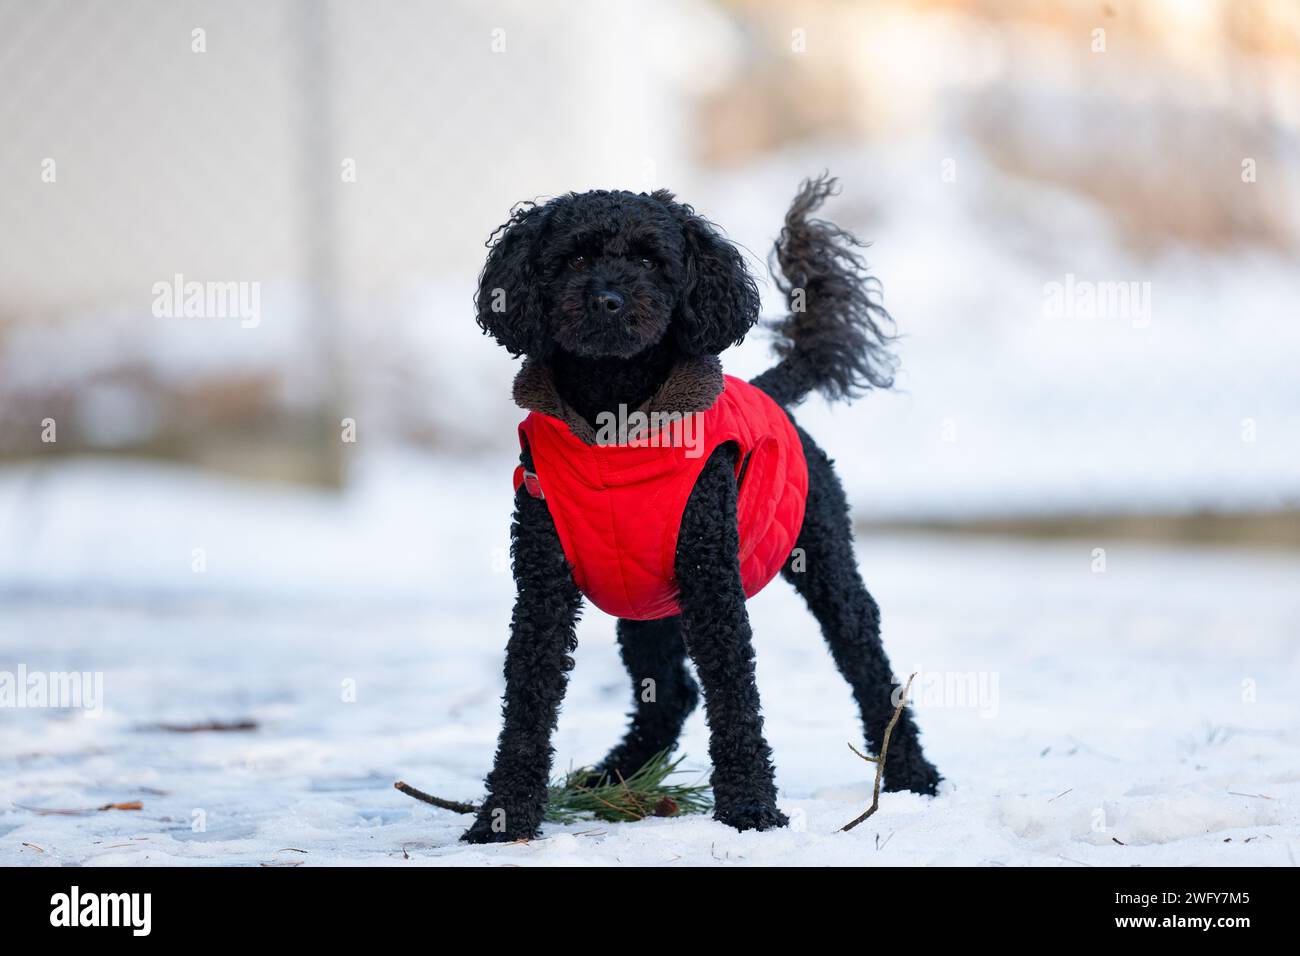 A small black dog in a red suit in the snow Stock Photo